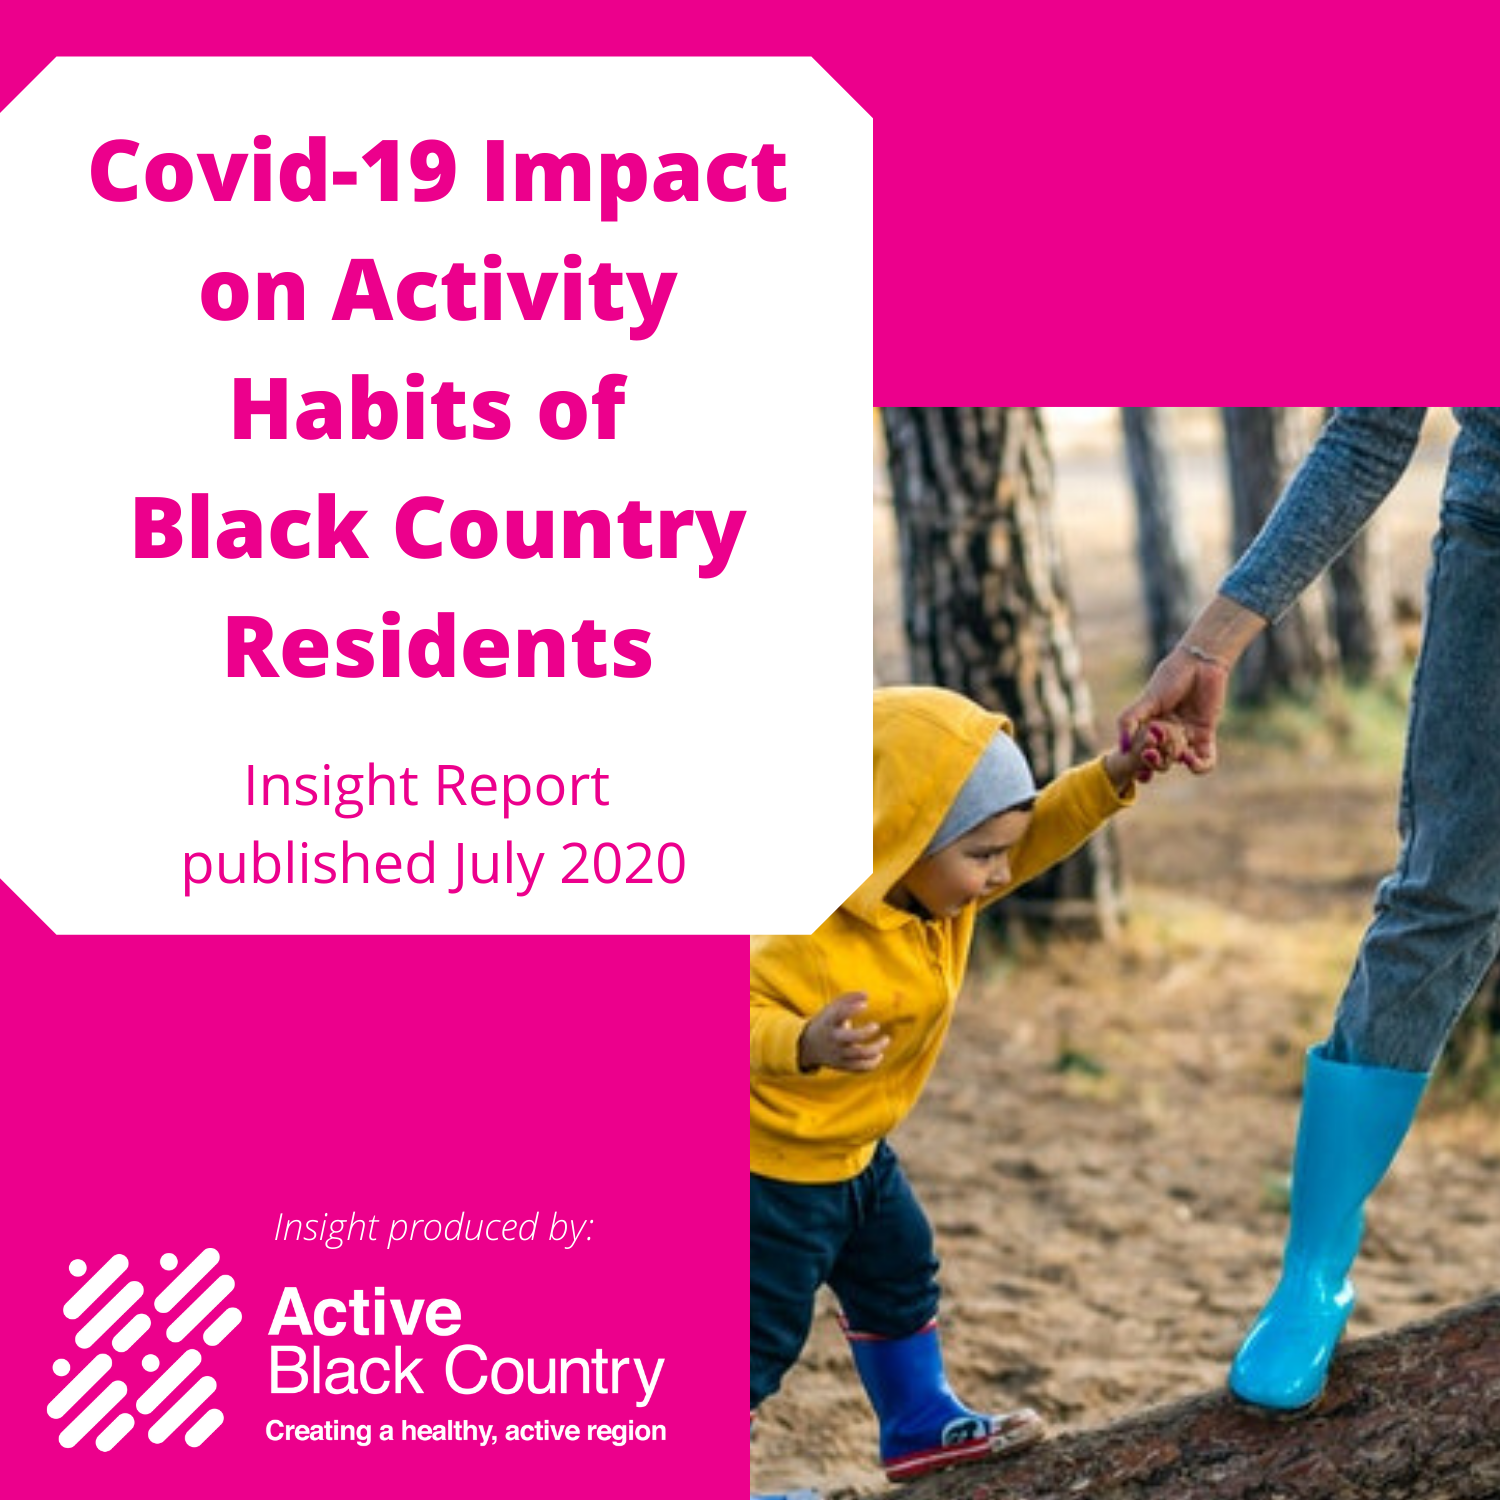 Covid-19 Lockdown Encourages Black Country Residents to be More Active